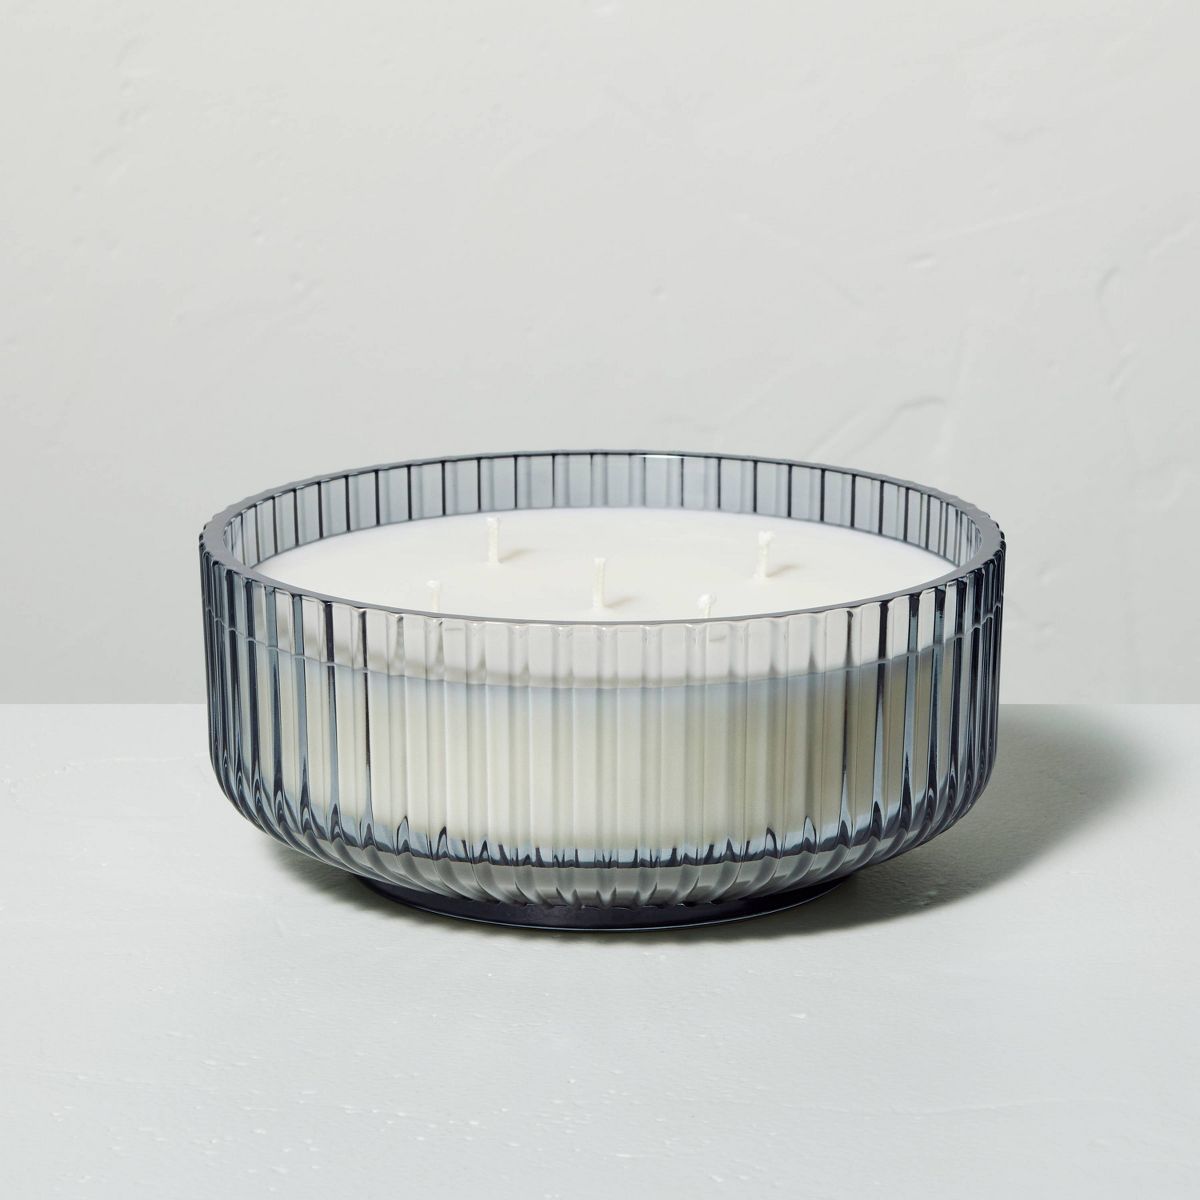 Ribbed Glass Cashmere & Suede Jar Candle Gray - Hearth & Hand™ with Magnolia | Target